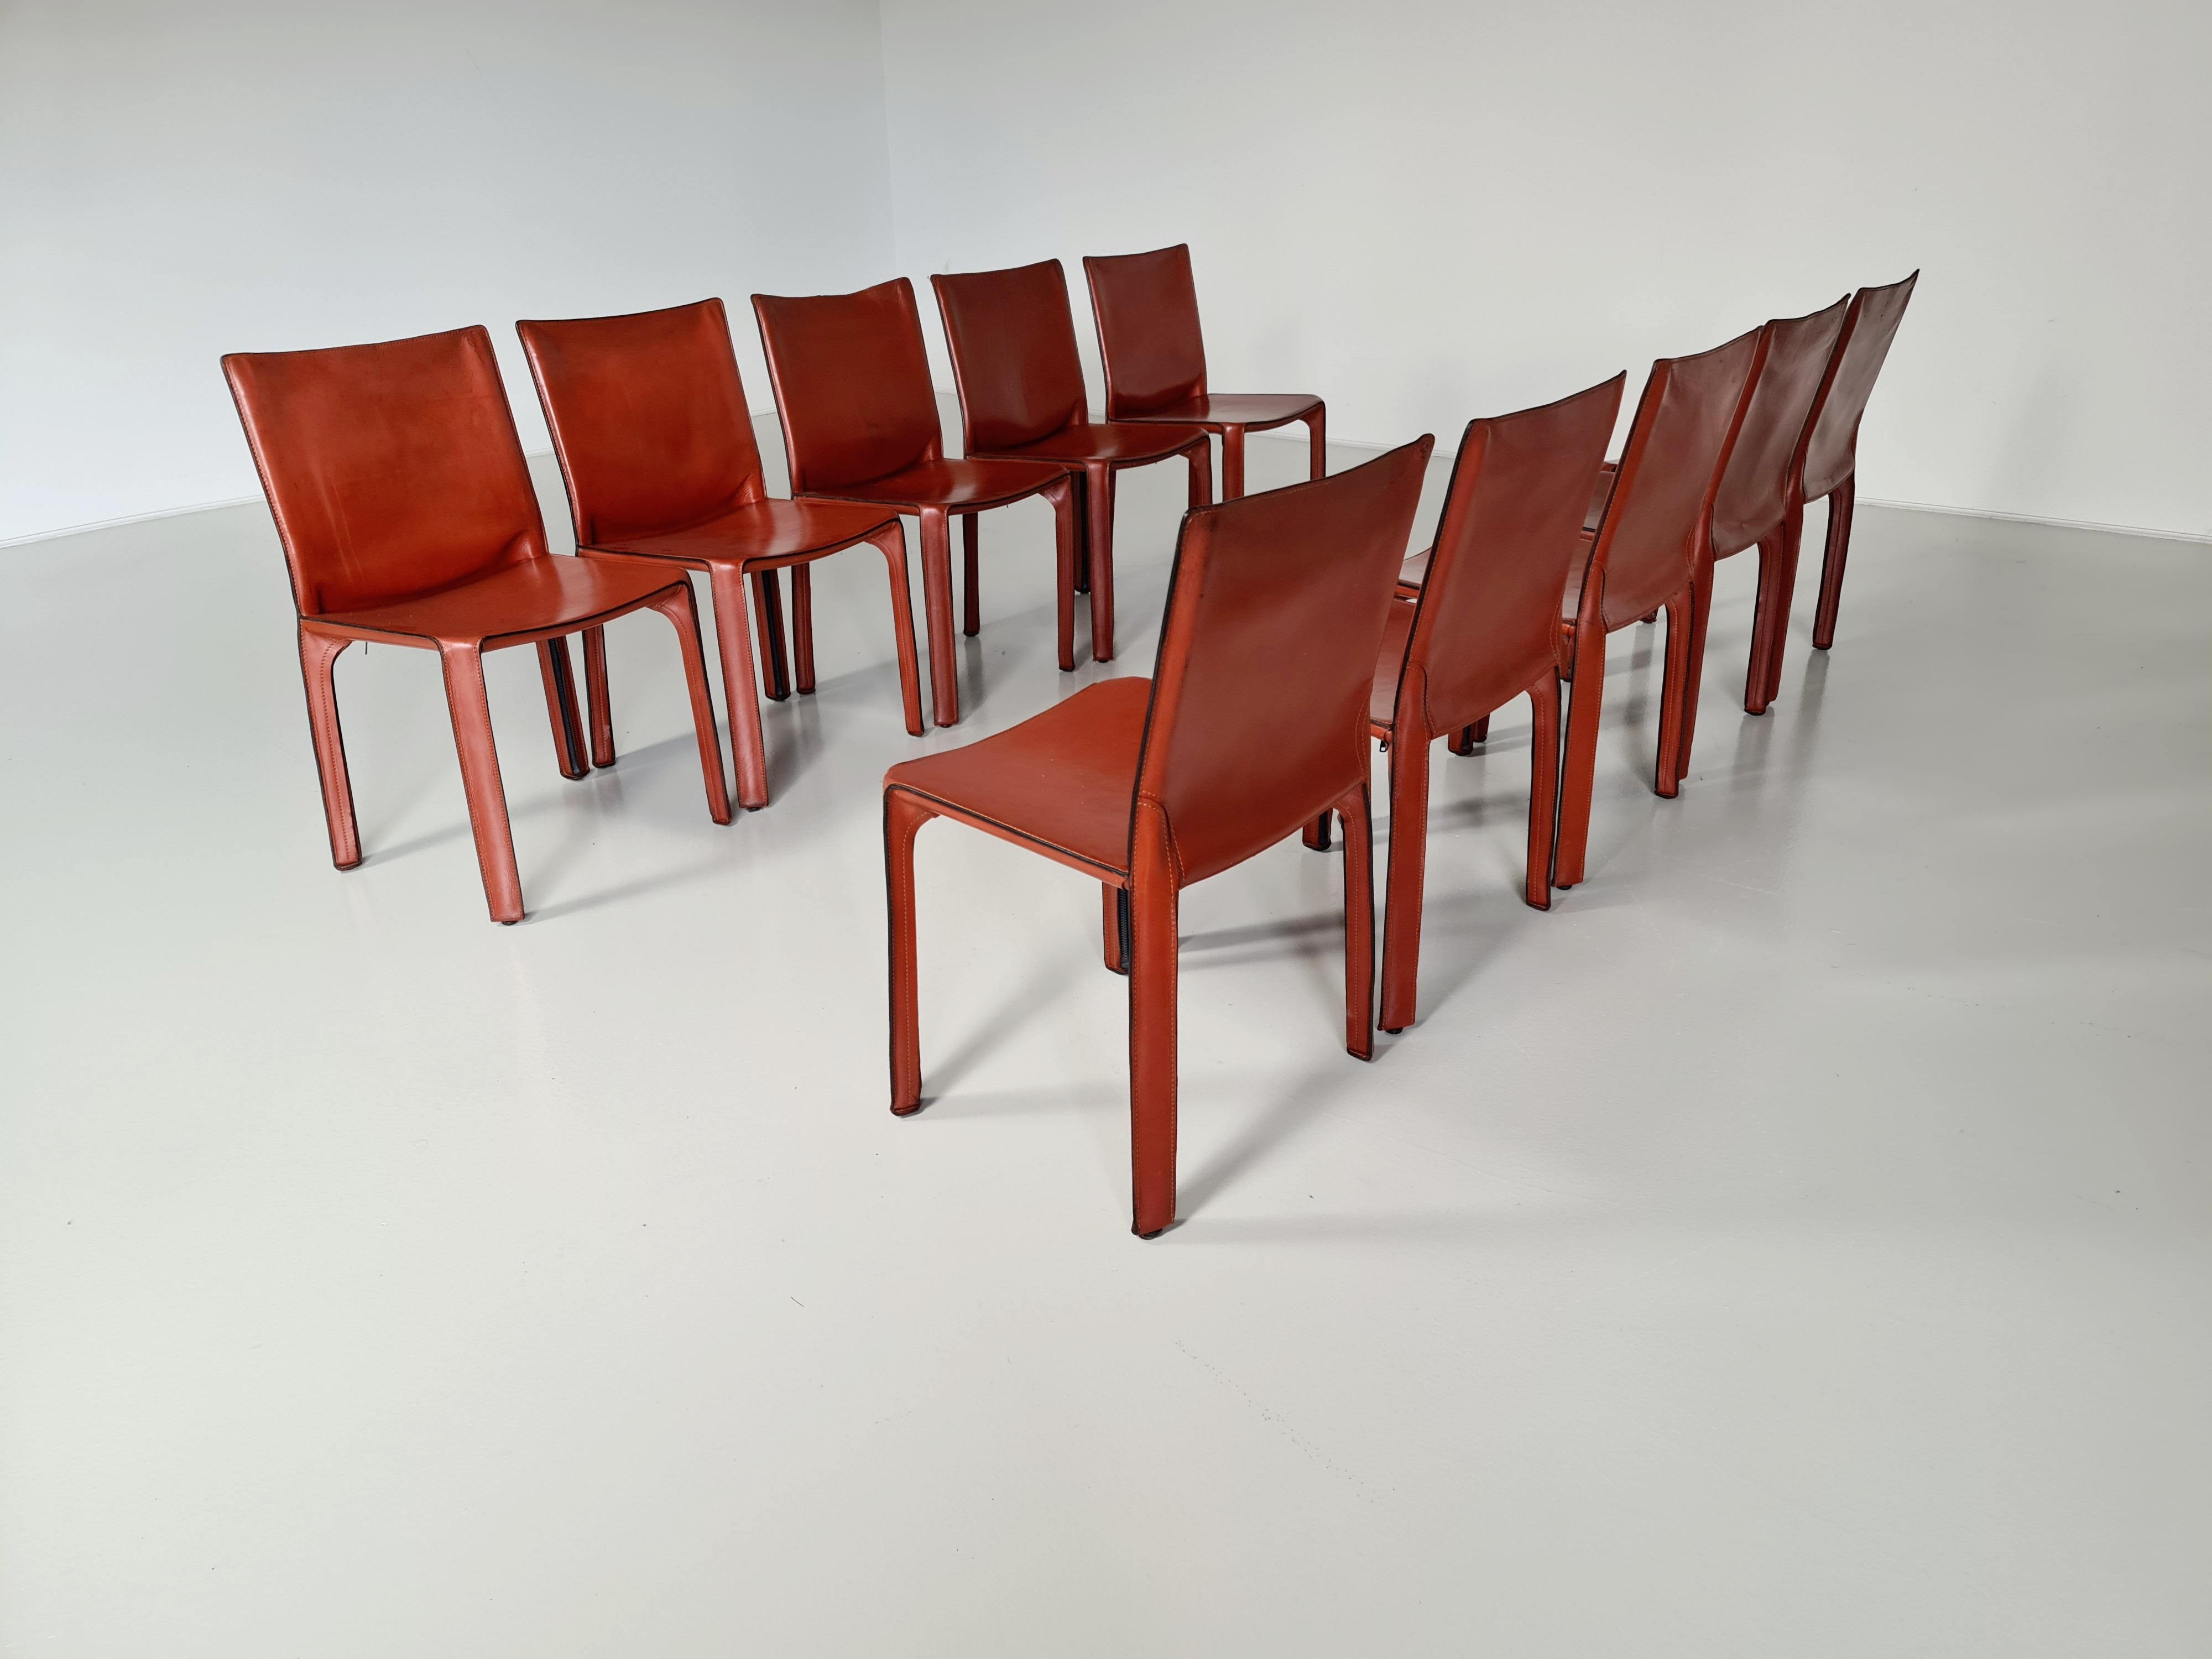 Set of 10 CAB-412 dining room chairs in Russian Red (also known as Bulgarian Red) saddle leather. Designed by Mario Bellini and manufactured by Cassina in the 1970s in Italy. These chairs are the early edition. The leather cover is stretched over a